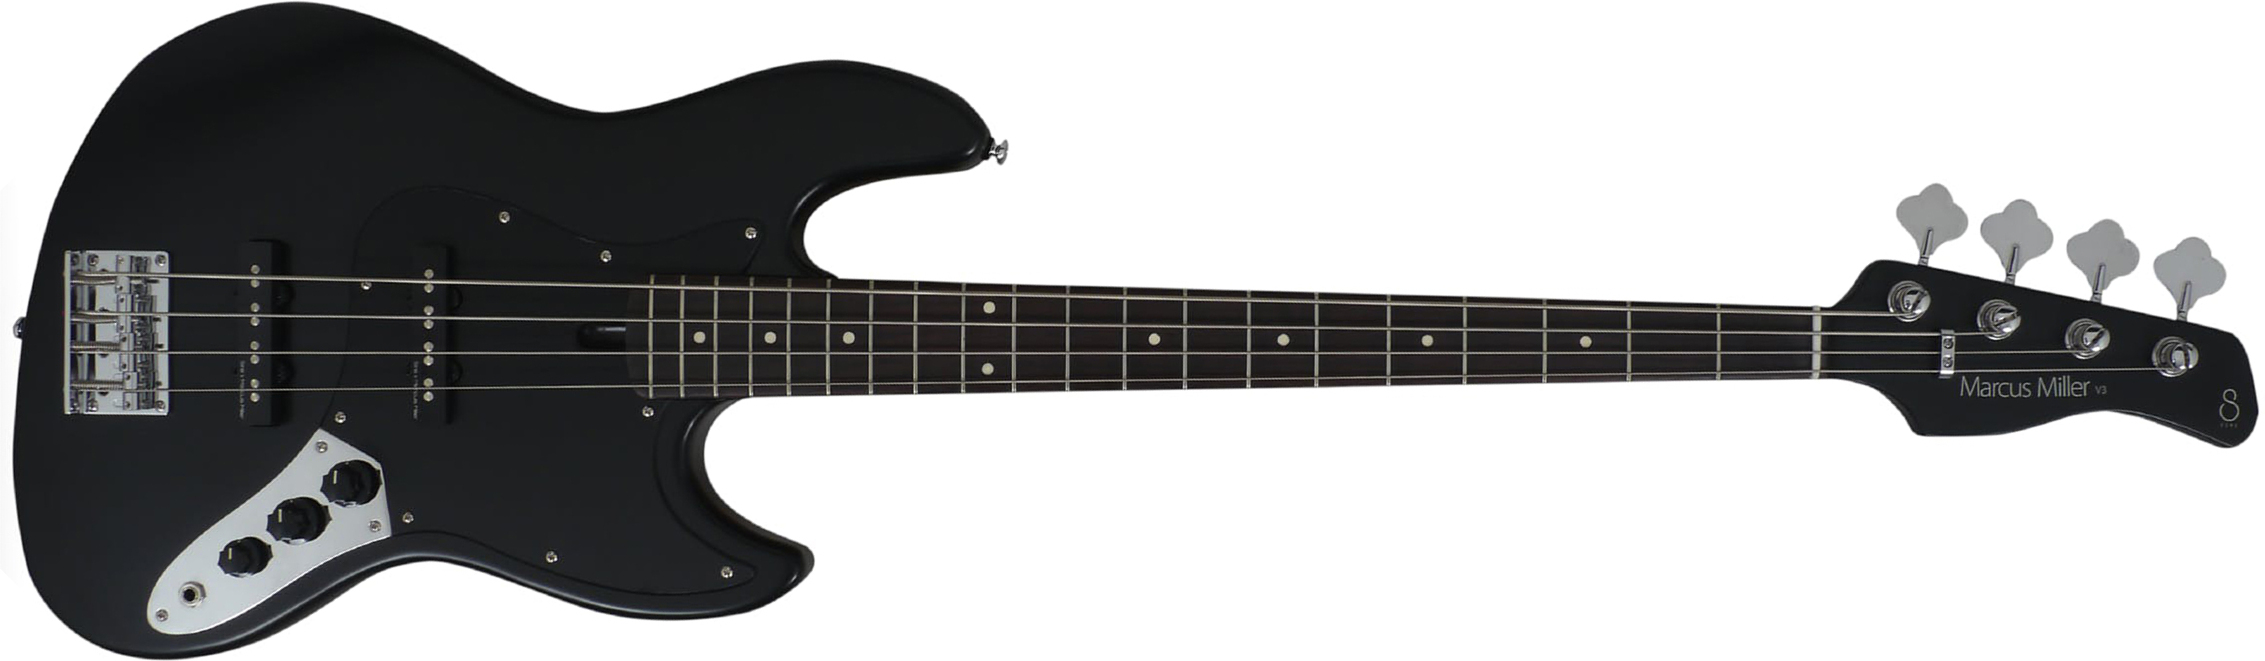 Marcus Miller V3p 4st Rw - Black Satin - Solid body electric bass - Main picture